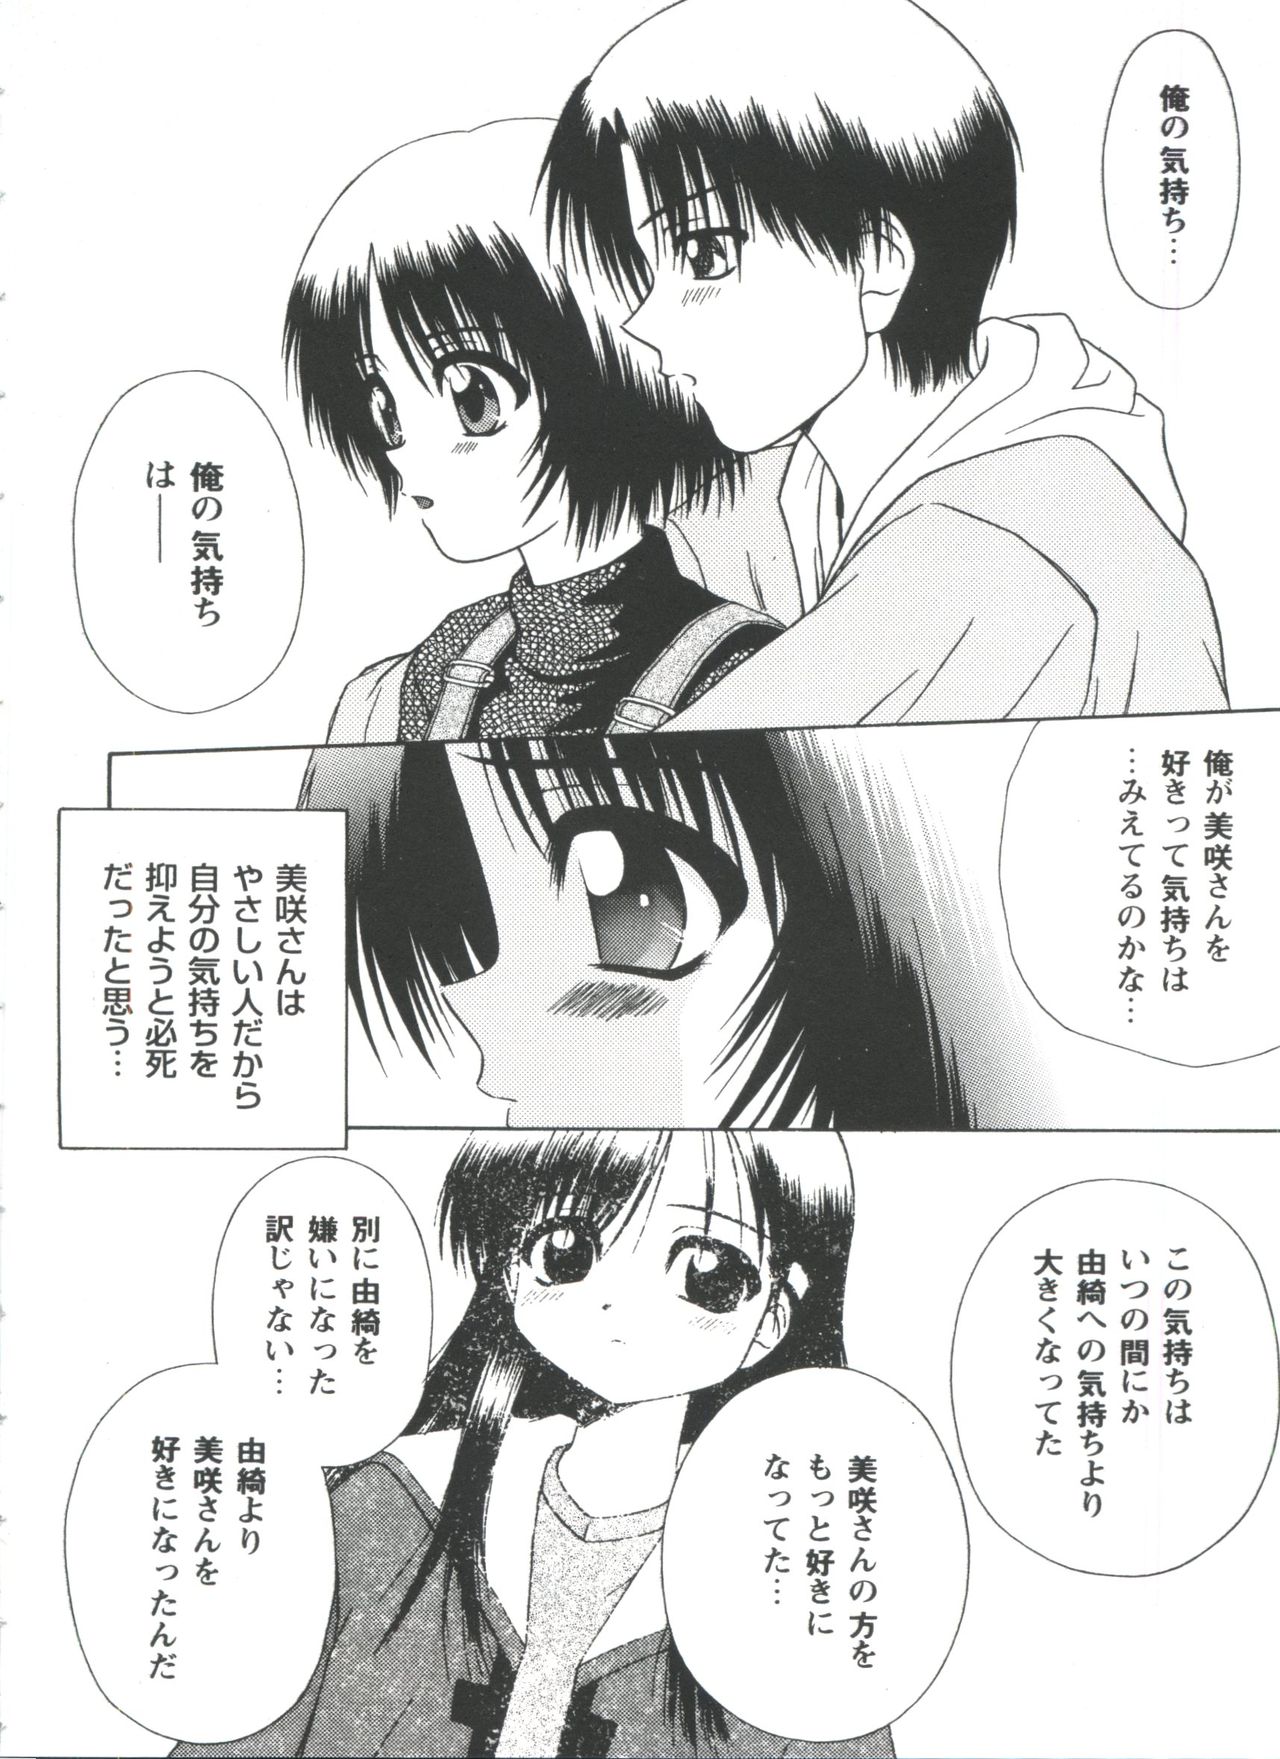 [Anthology] Love Heart 4 (To Heart, White Album) page 44 full